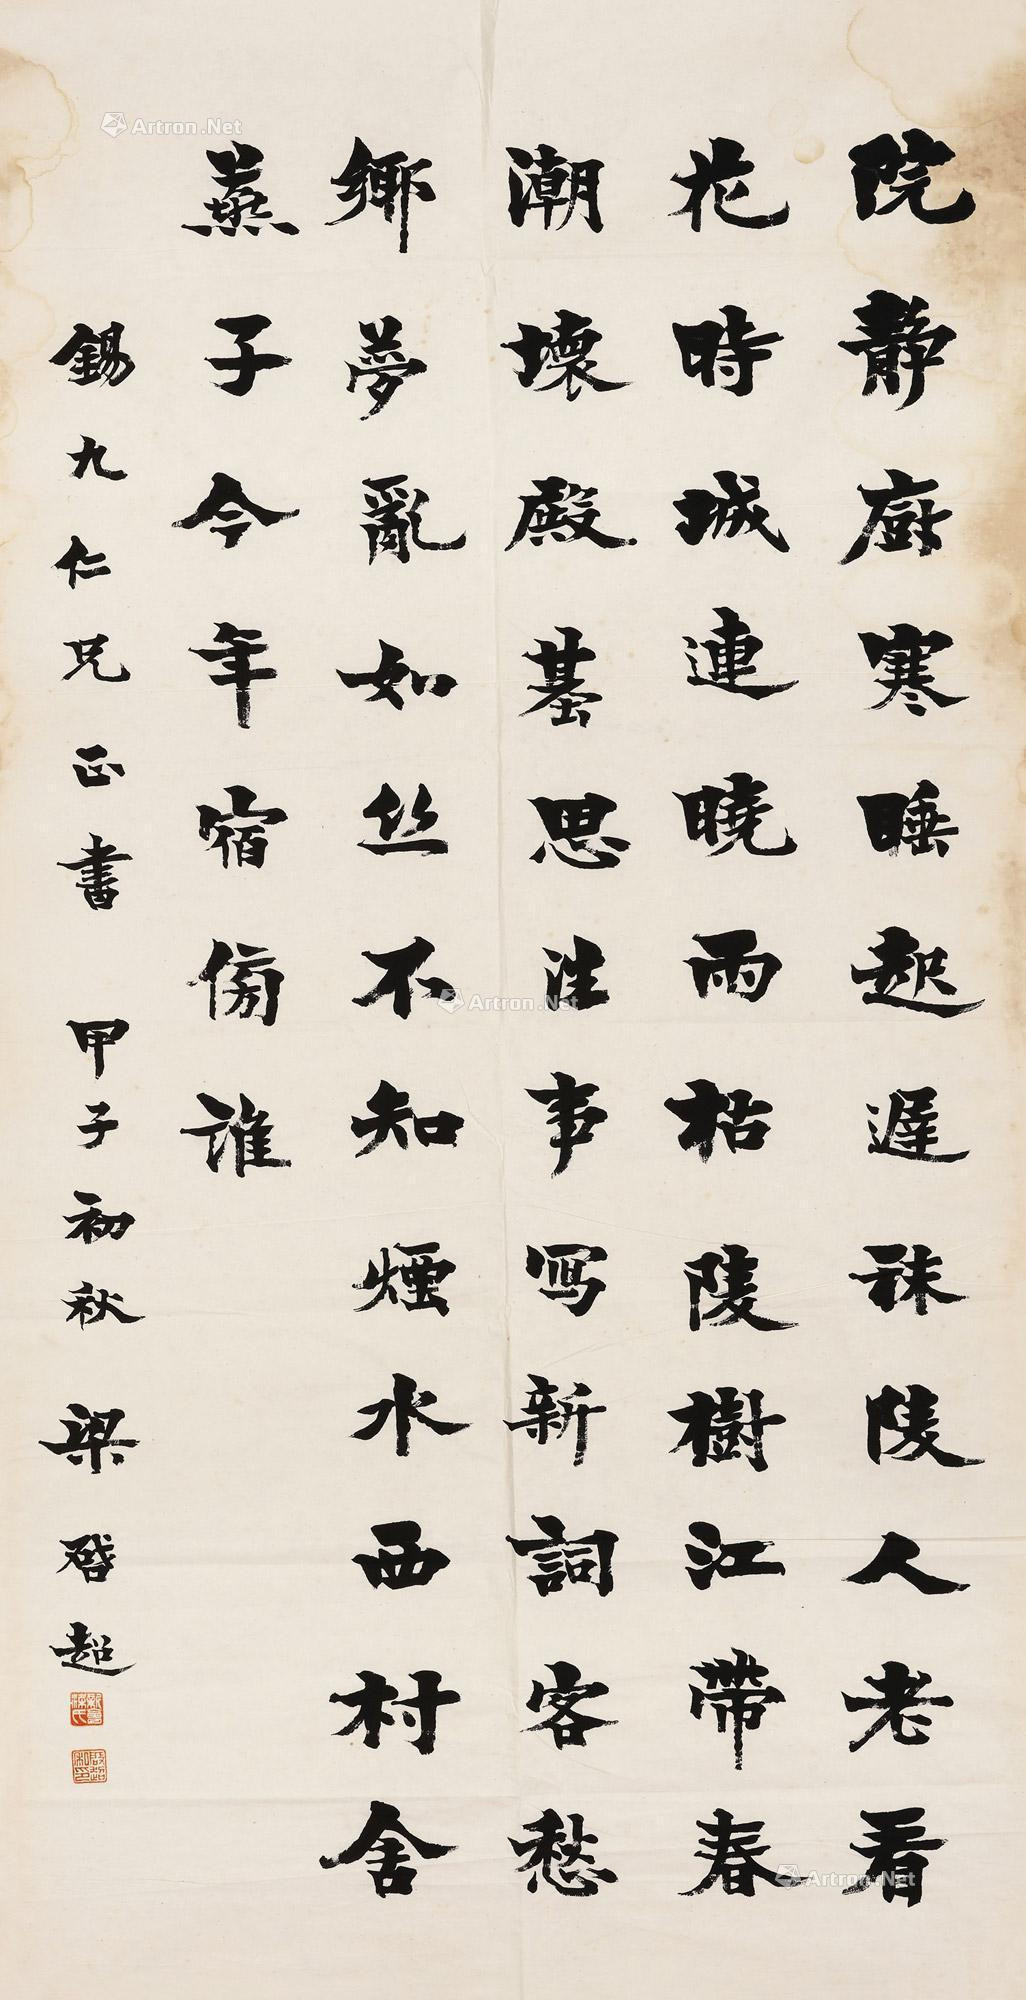 Calligraphy“Partridge Days” by Liang Qichao